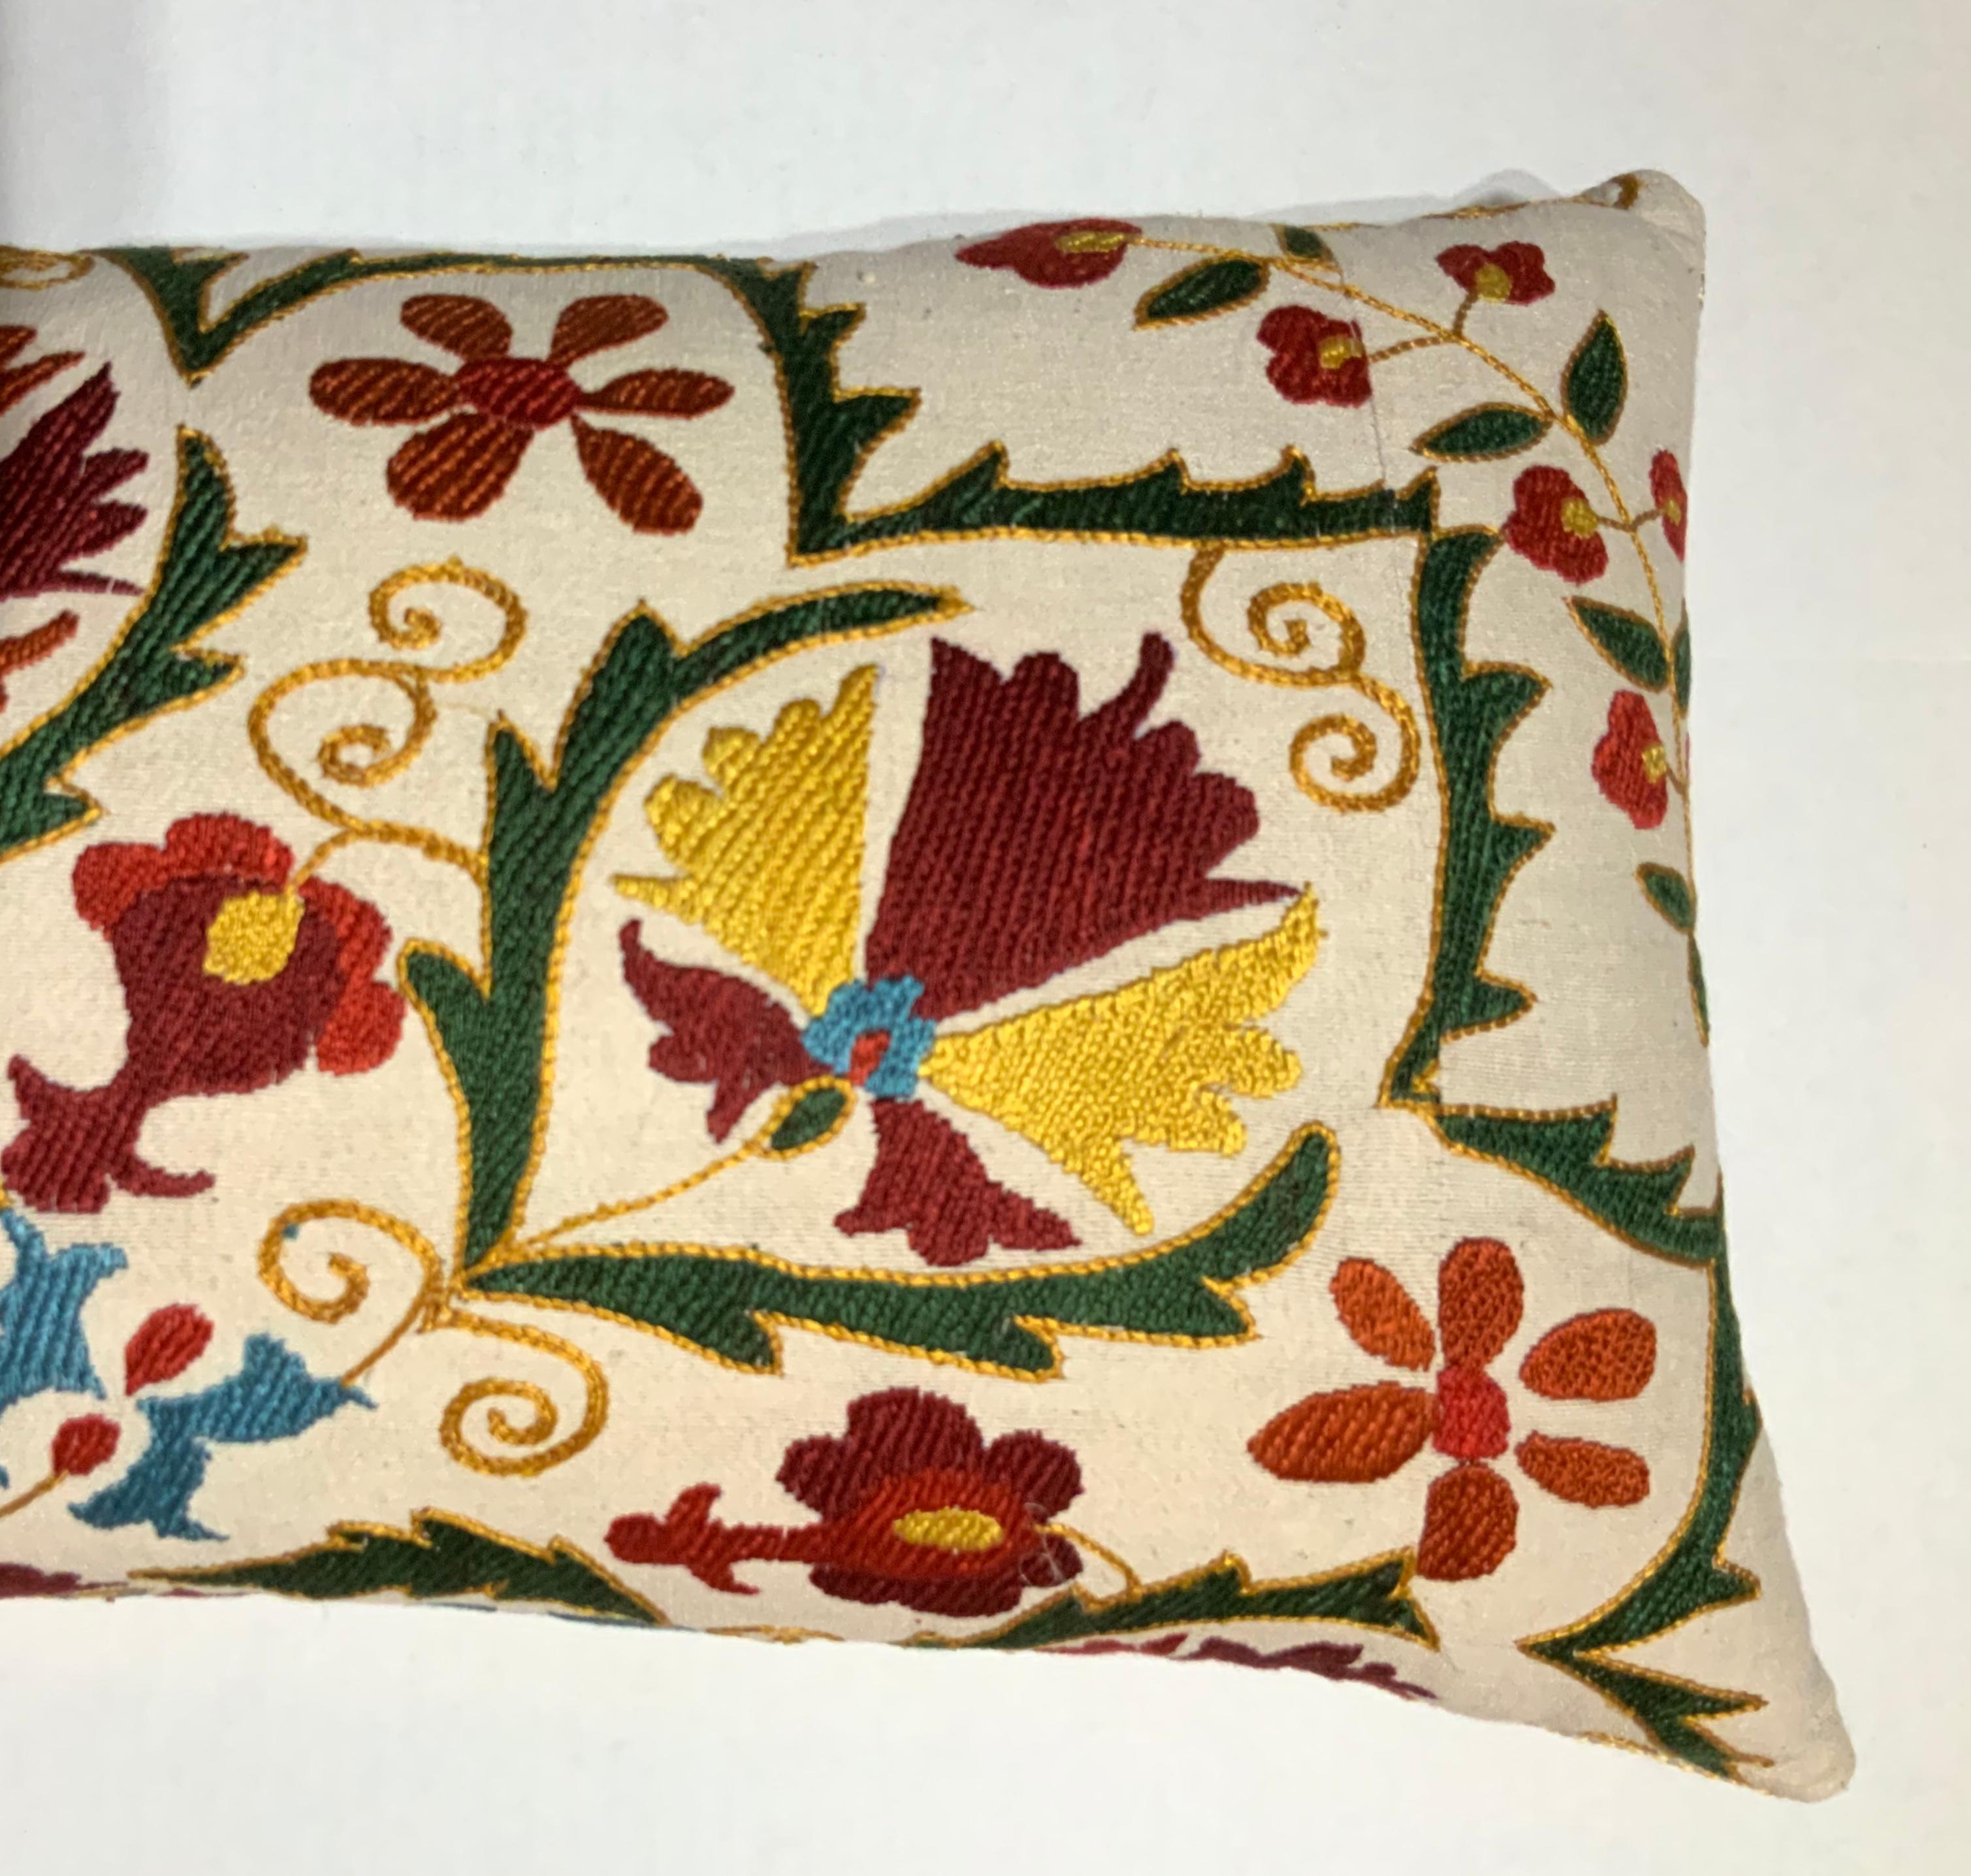 Beautiful pair of pillows made of hand embroidery silk on cream color background, vebrent colors of red, green, indigo turquoise and gold, of exceptional motif or vines flowers and pomegranates. Fine cotton backing with fresh new